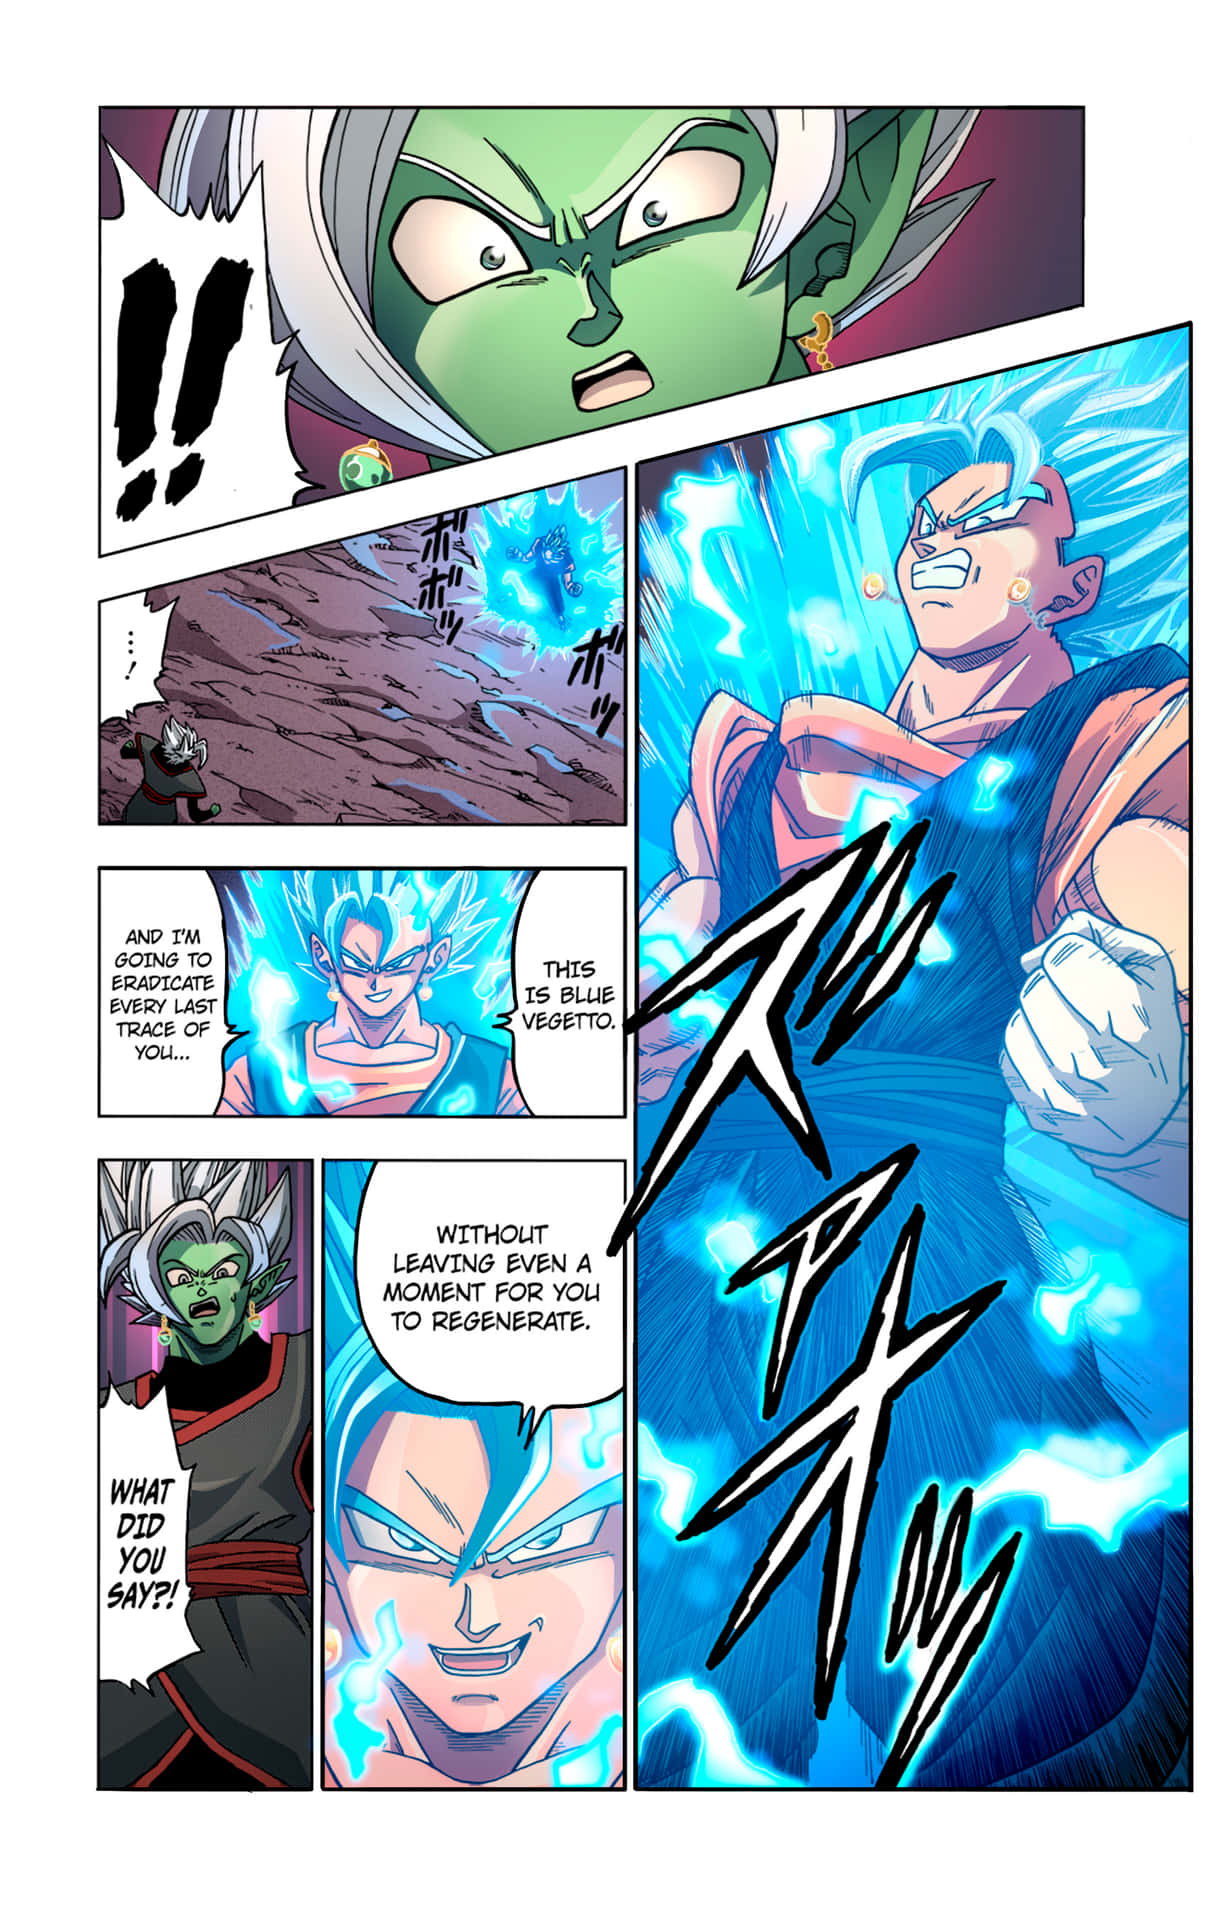 Action-packed moments in the hit Dragon Ball Super Manga! Wallpaper